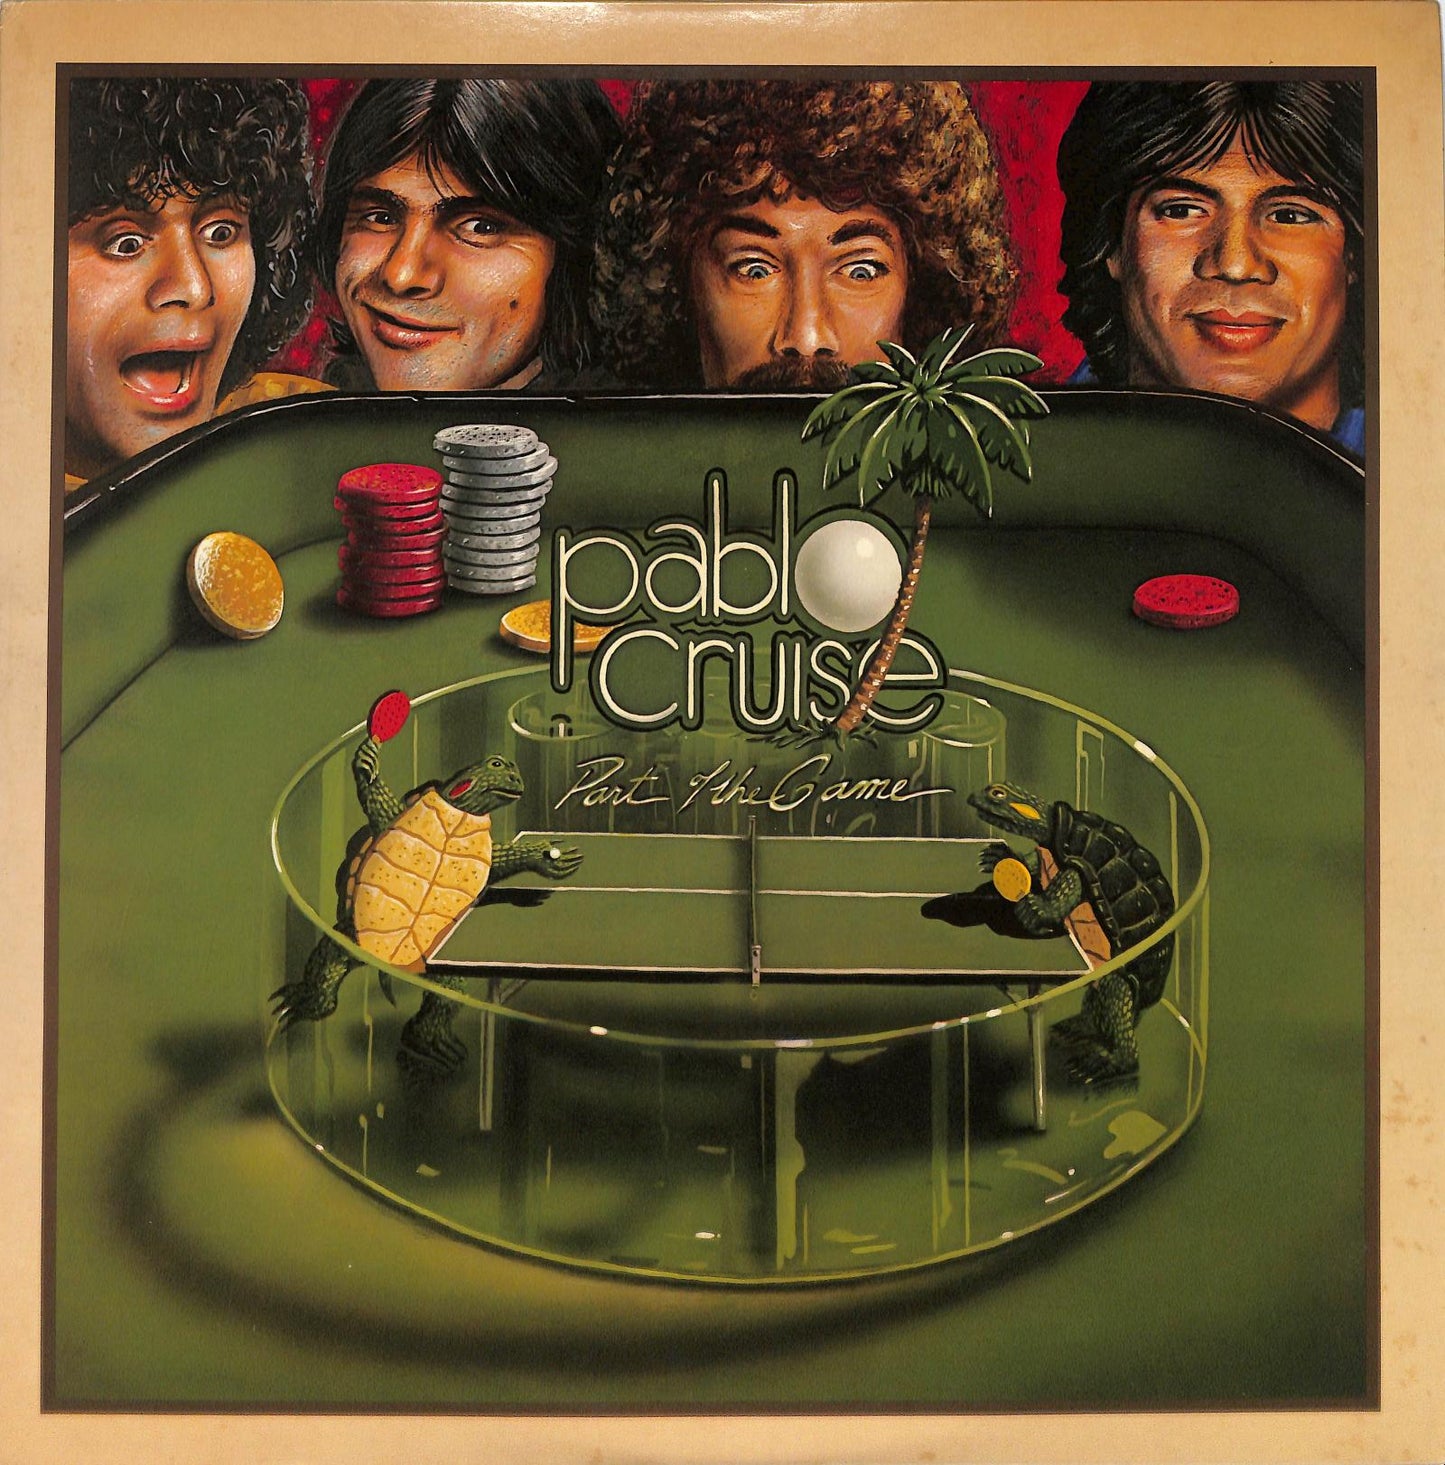 PABLO CRUISE - Part Of The Game